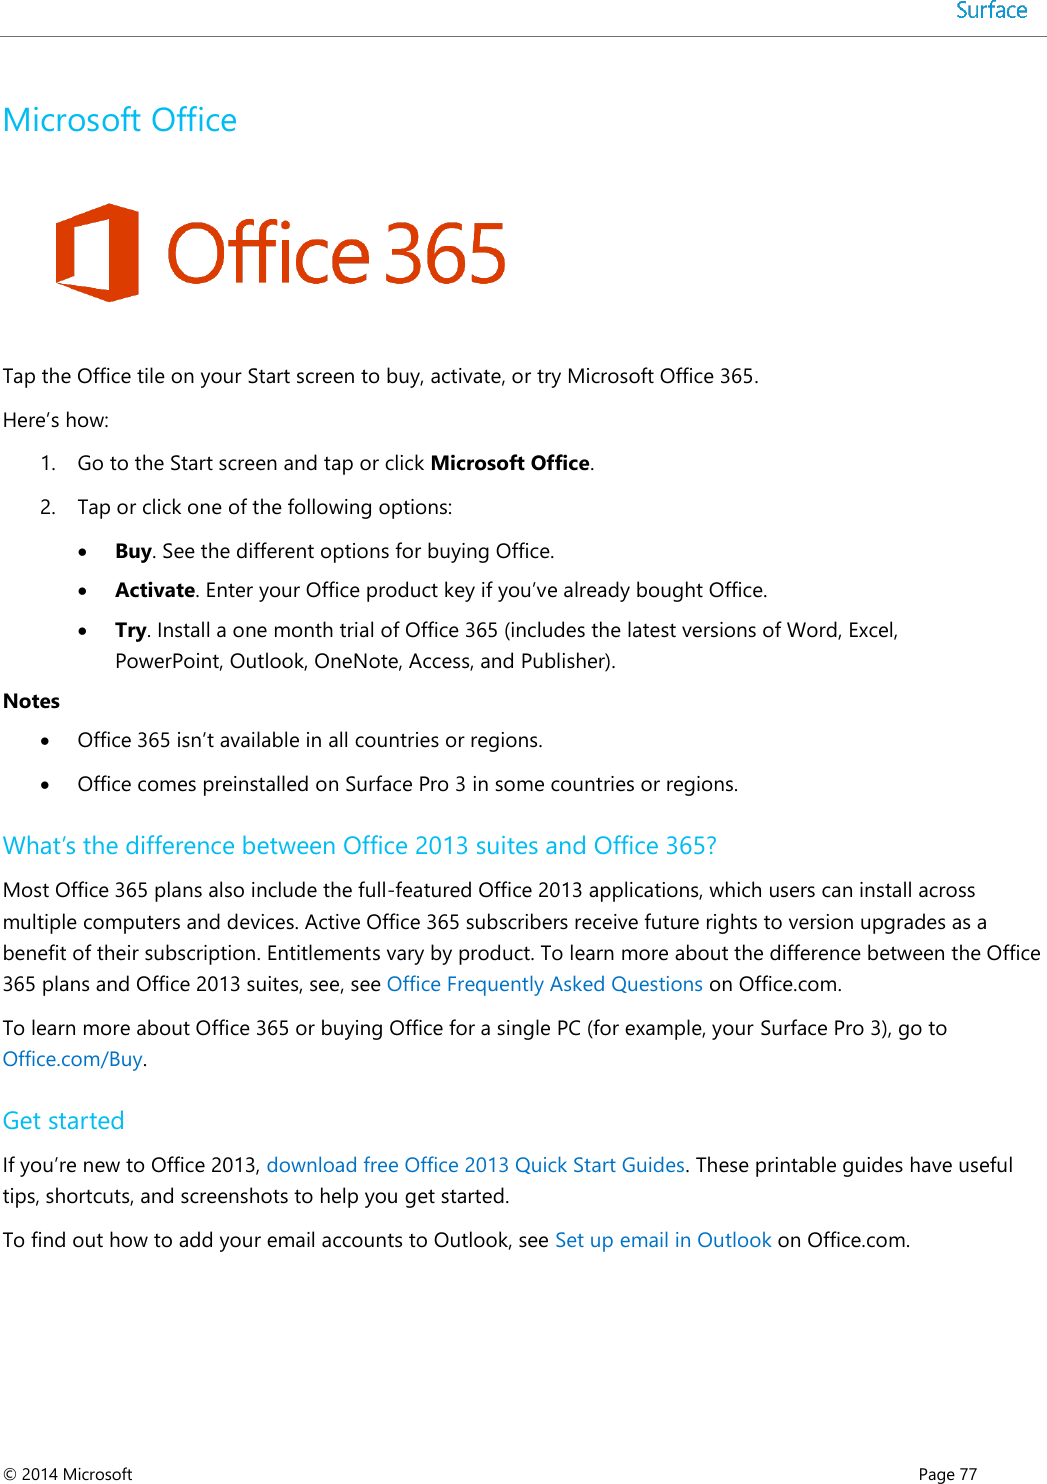  © 2014 Microsoft      Page 77  Microsoft Office   Tap the Office tile on your Start screen to buy, activate, or try Microsoft Office 365.  Here’s how: 1. Go to the Start screen and tap or click Microsoft Office. 2. Tap or click one of the following options:  Buy. See the different options for buying Office.  Activate. Enter your Office product key if you’ve already bought Office.  Try. Install a one month trial of Office 365 (includes the latest versions of Word, Excel, PowerPoint, Outlook, OneNote, Access, and Publisher). Notes  Office 365 isn’t available in all countries or regions.  Office comes preinstalled on Surface Pro 3 in some countries or regions. What’s the difference between Office 2013 suites and Office 365? Most Office 365 plans also include the full-featured Office 2013 applications, which users can install across multiple computers and devices. Active Office 365 subscribers receive future rights to version upgrades as a benefit of their subscription. Entitlements vary by product. To learn more about the difference between the Office 365 plans and Office 2013 suites, see, see Office Frequently Asked Questions on Office.com.  To learn more about Office 365 or buying Office for a single PC (for example, your Surface Pro 3), go to Office.com/Buy. Get started  If you’re new to Office 2013, download free Office 2013 Quick Start Guides. These printable guides have useful tips, shortcuts, and screenshots to help you get started.  To find out how to add your email accounts to Outlook, see Set up email in Outlook on Office.com.   